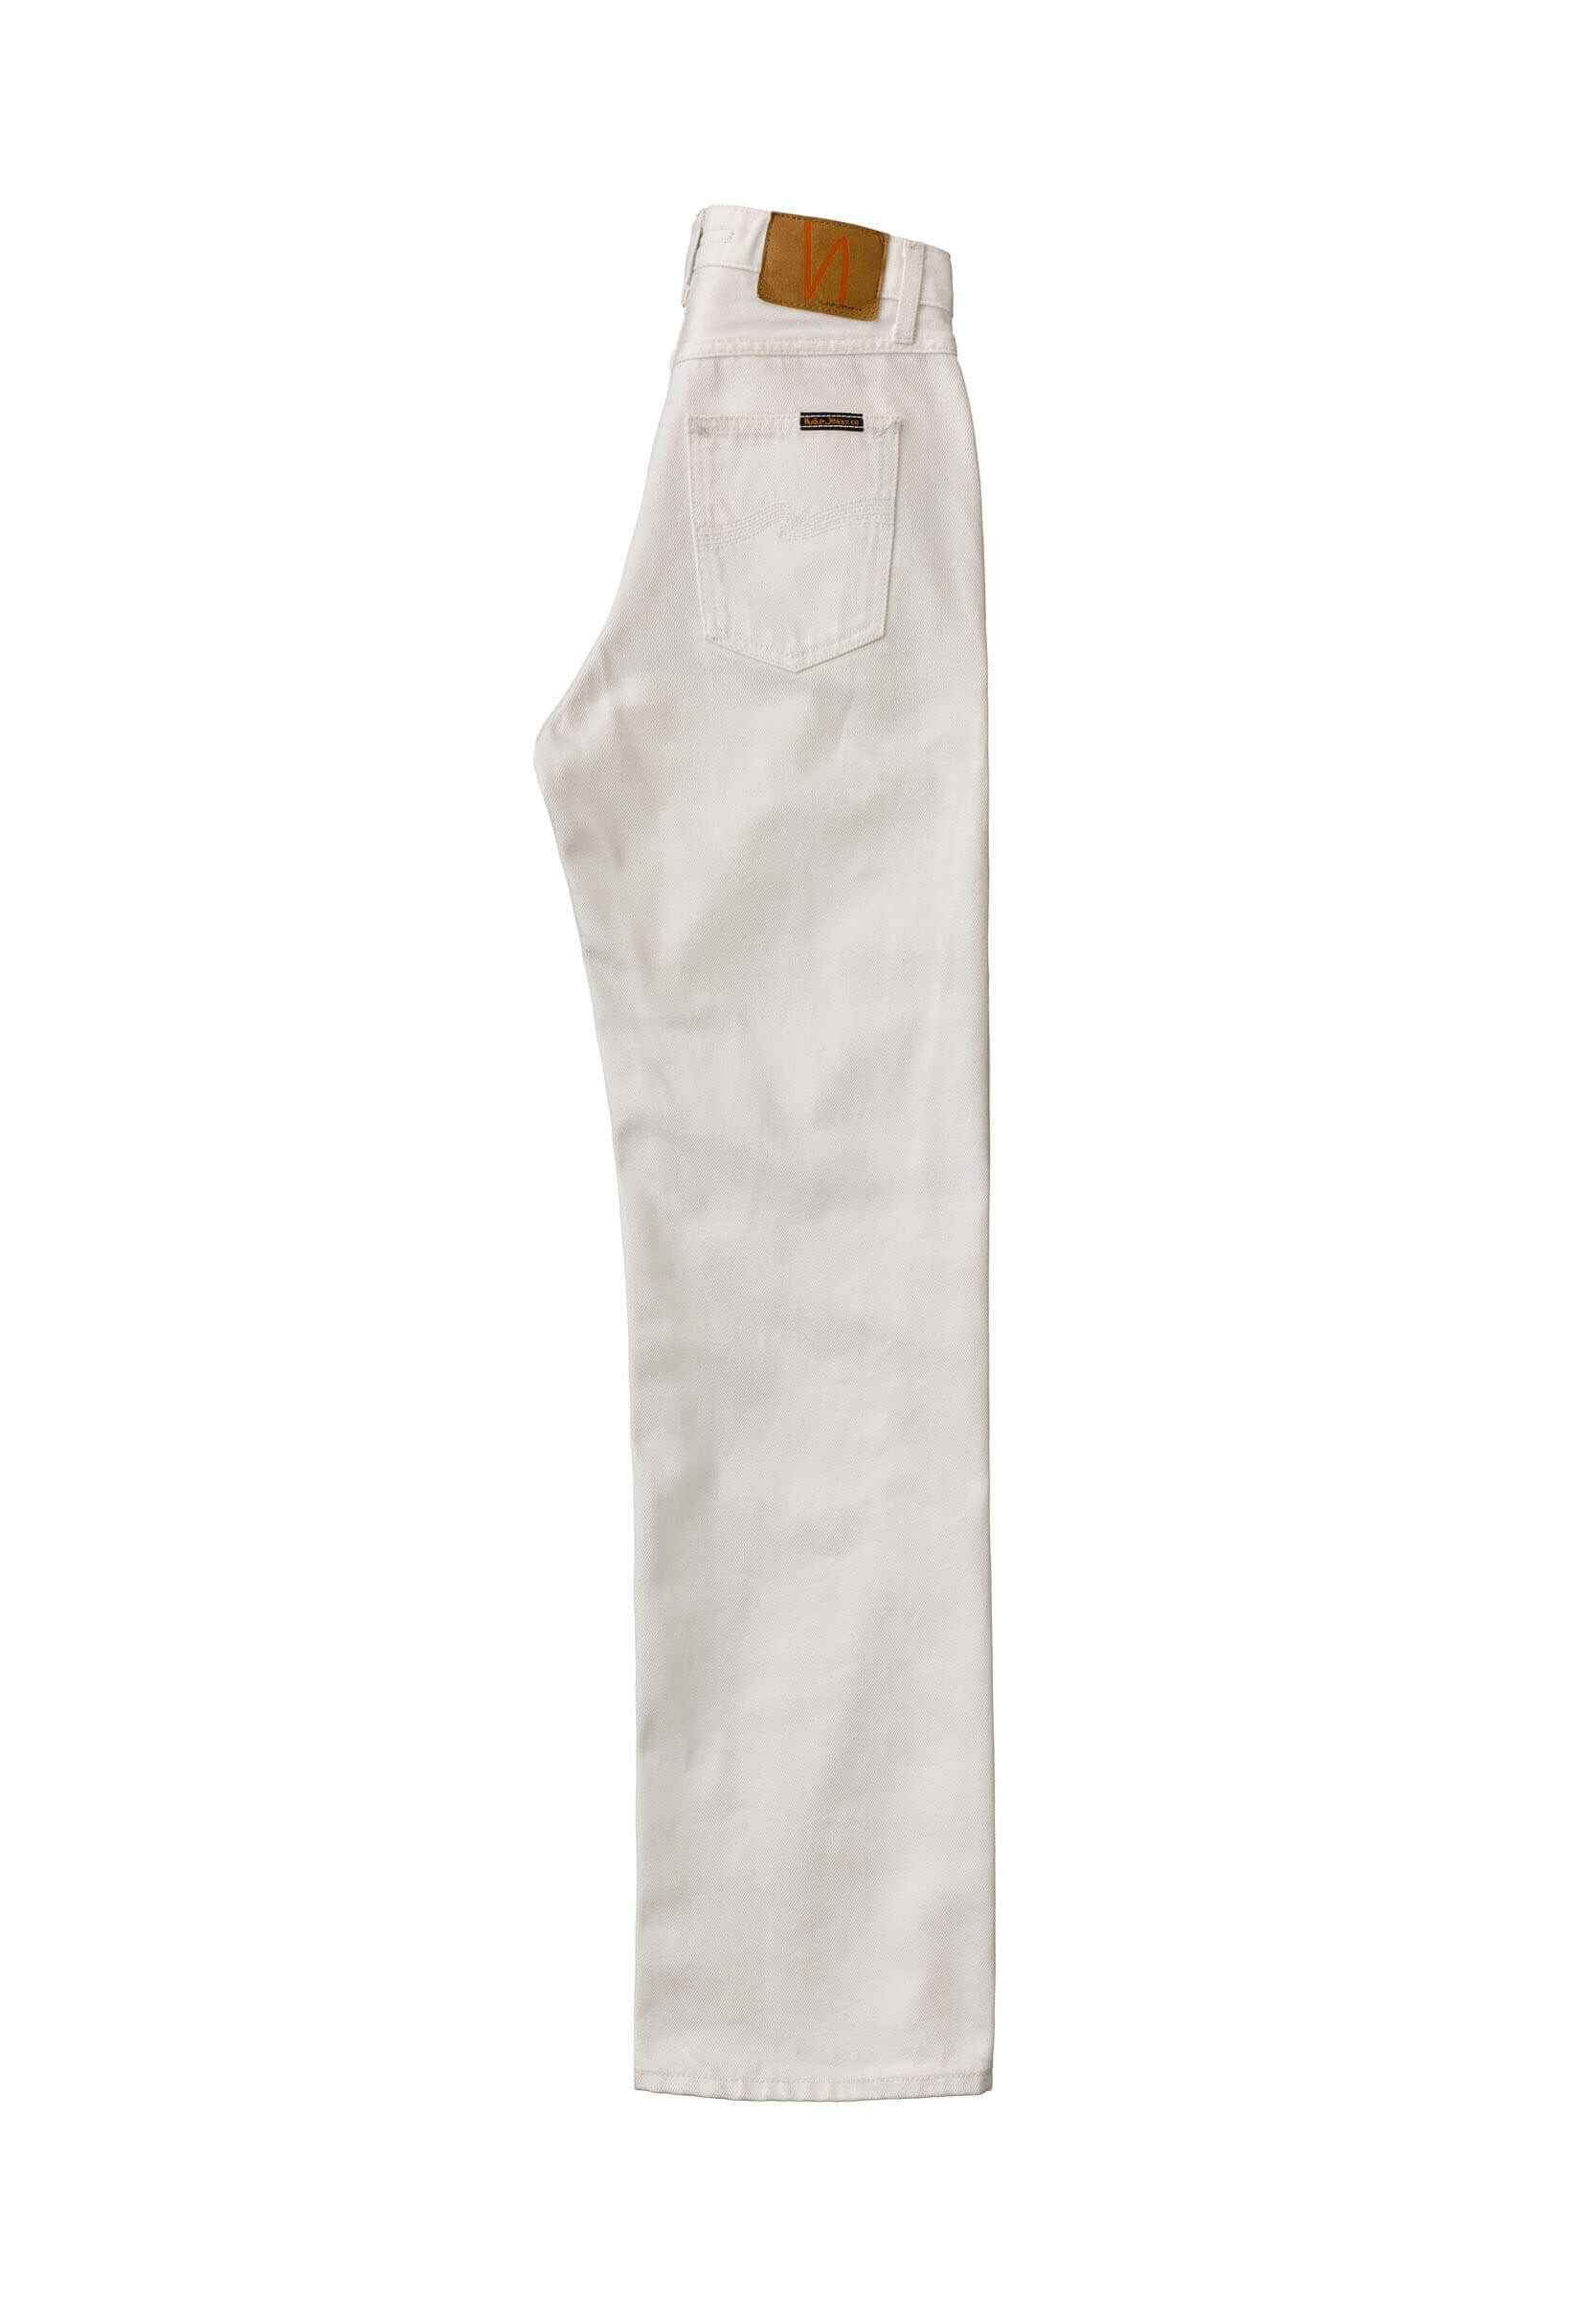 NUDIE JEANS Jeans Clean Eileen recycled white 29/28